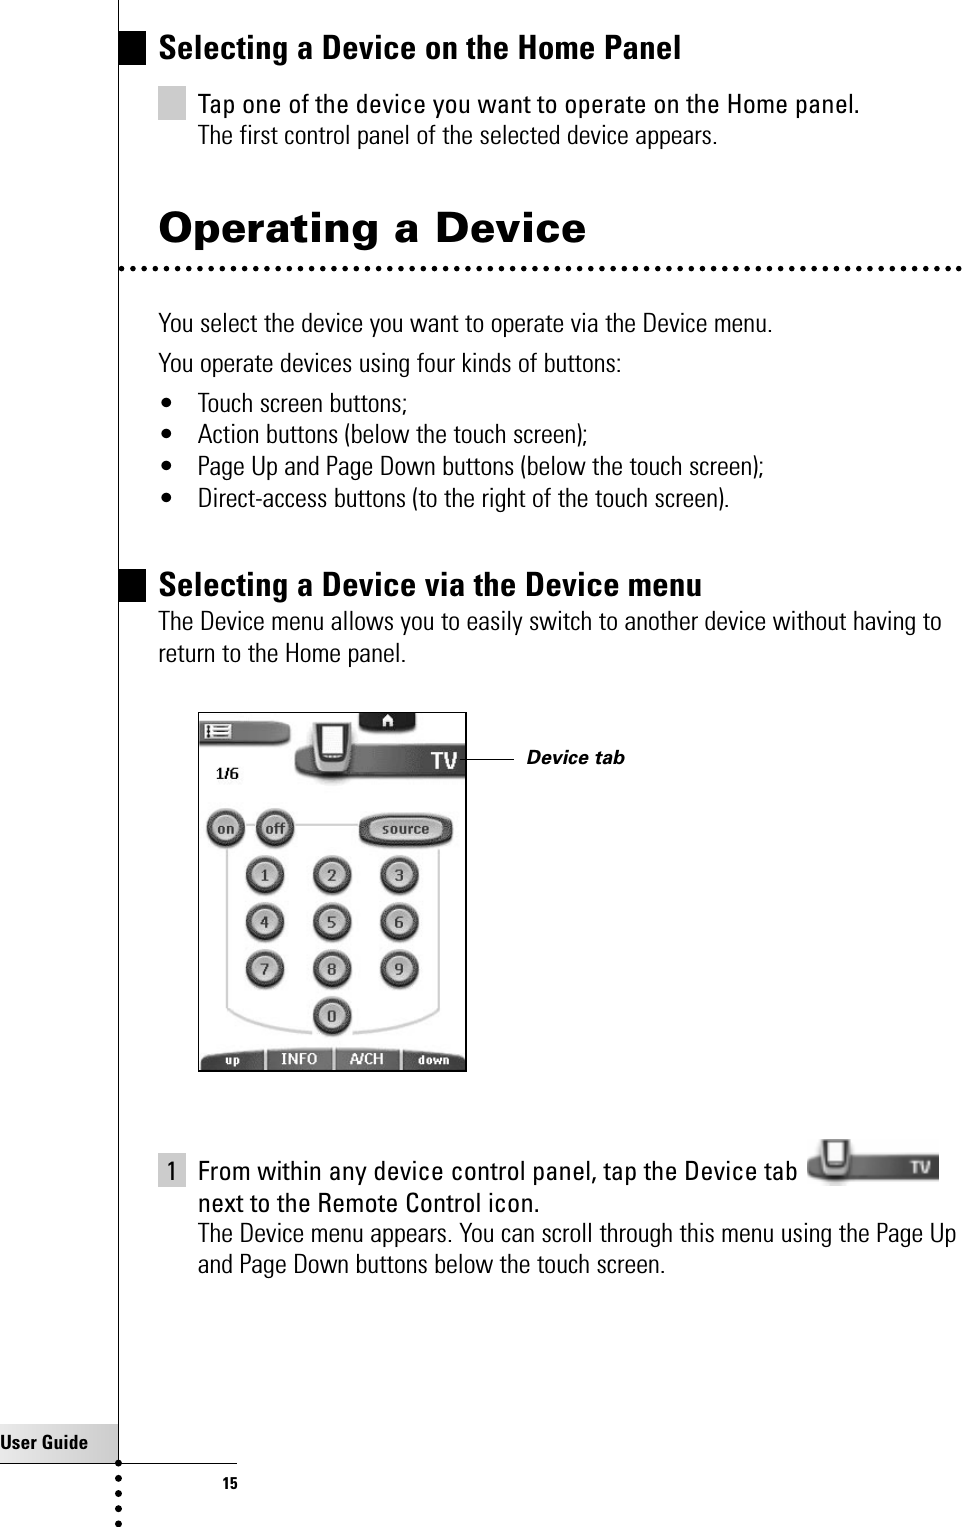 User Guide15Getting StartedSelecting a Device on the Home PanelTap one of the device you want to operate on the Home panel.The first control panel of the selected device appears.Operating a DeviceYou select the device you want to operate via the Device menu. You operate devices using four kinds of buttons:• Touch screen buttons;• Action buttons (below the touch screen);• Page Up and Page Down buttons (below the touch screen);• Direct-access buttons (to the right of the touch screen).Selecting a Device via the Device menu The Device menu allows you to easily switch to another device without having toreturn to the Home panel.1 From within any device control panel, tap the Device tab next to the Remote Control icon.The Device menu appears. You can scroll through this menu using the Page Upand Page Down buttons below the touch screen.Device tab